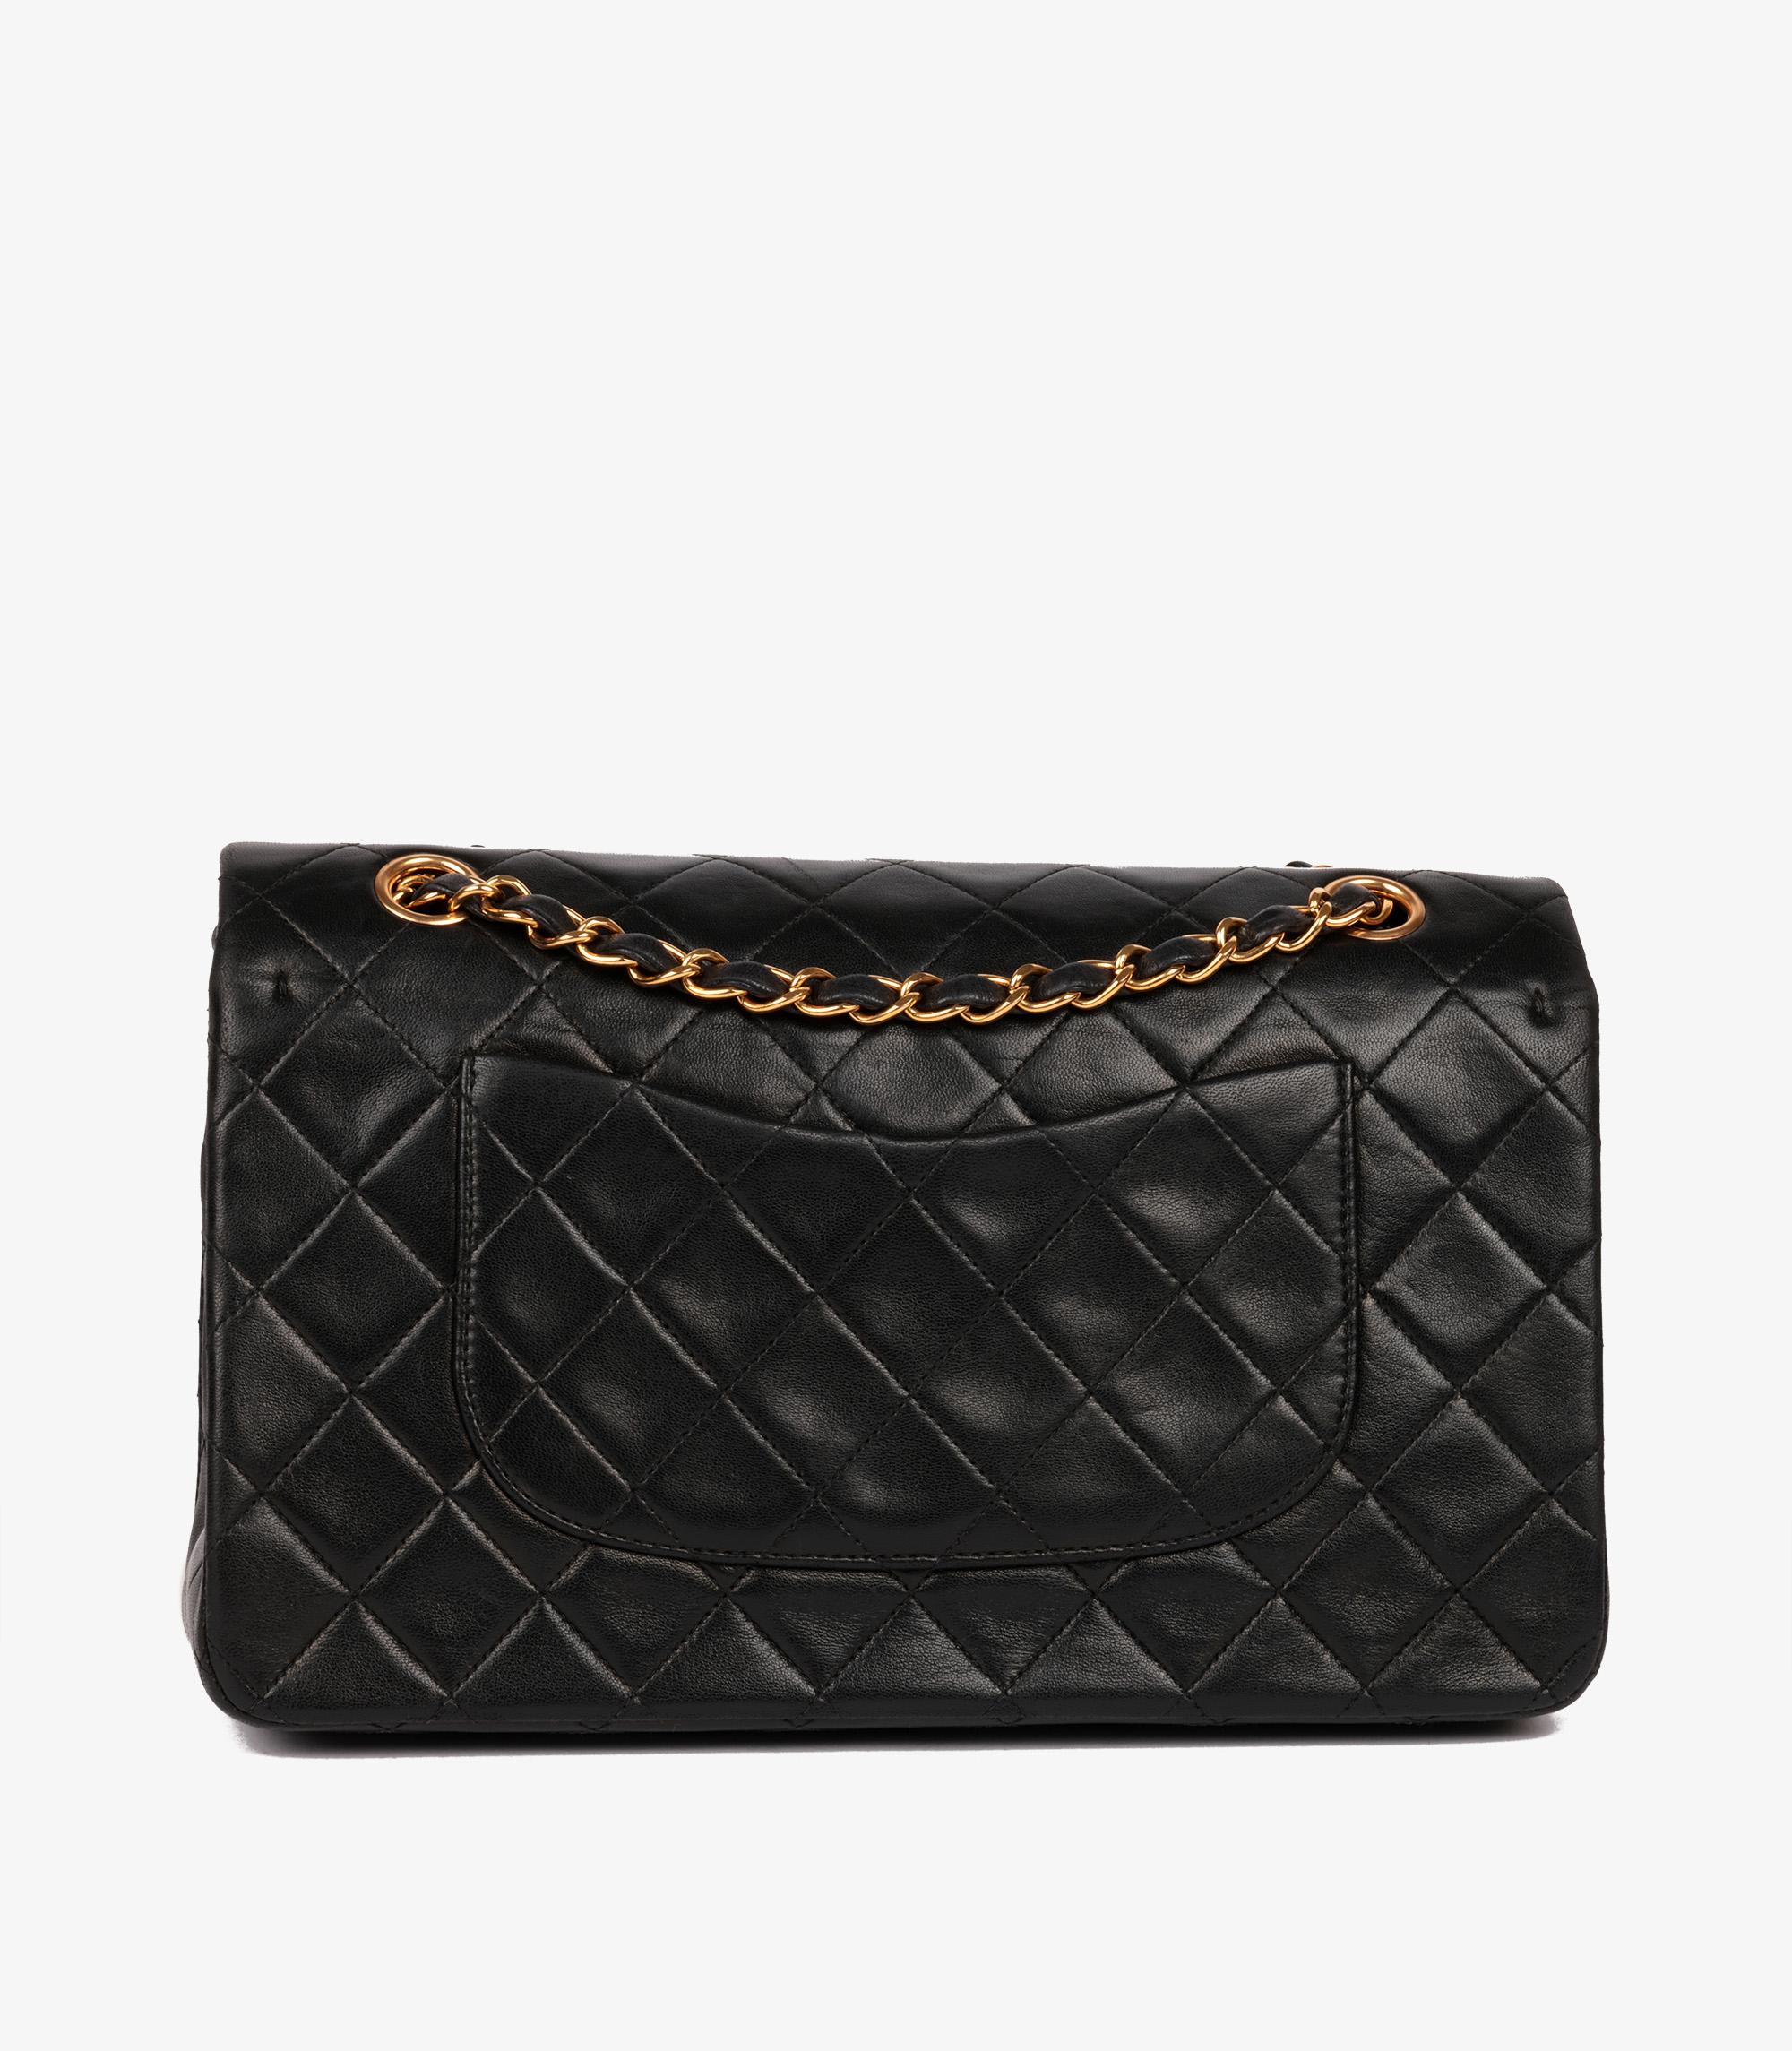 Chanel Black Quilted Lambskin Vintage Medium Classic Double Flap Bag 2